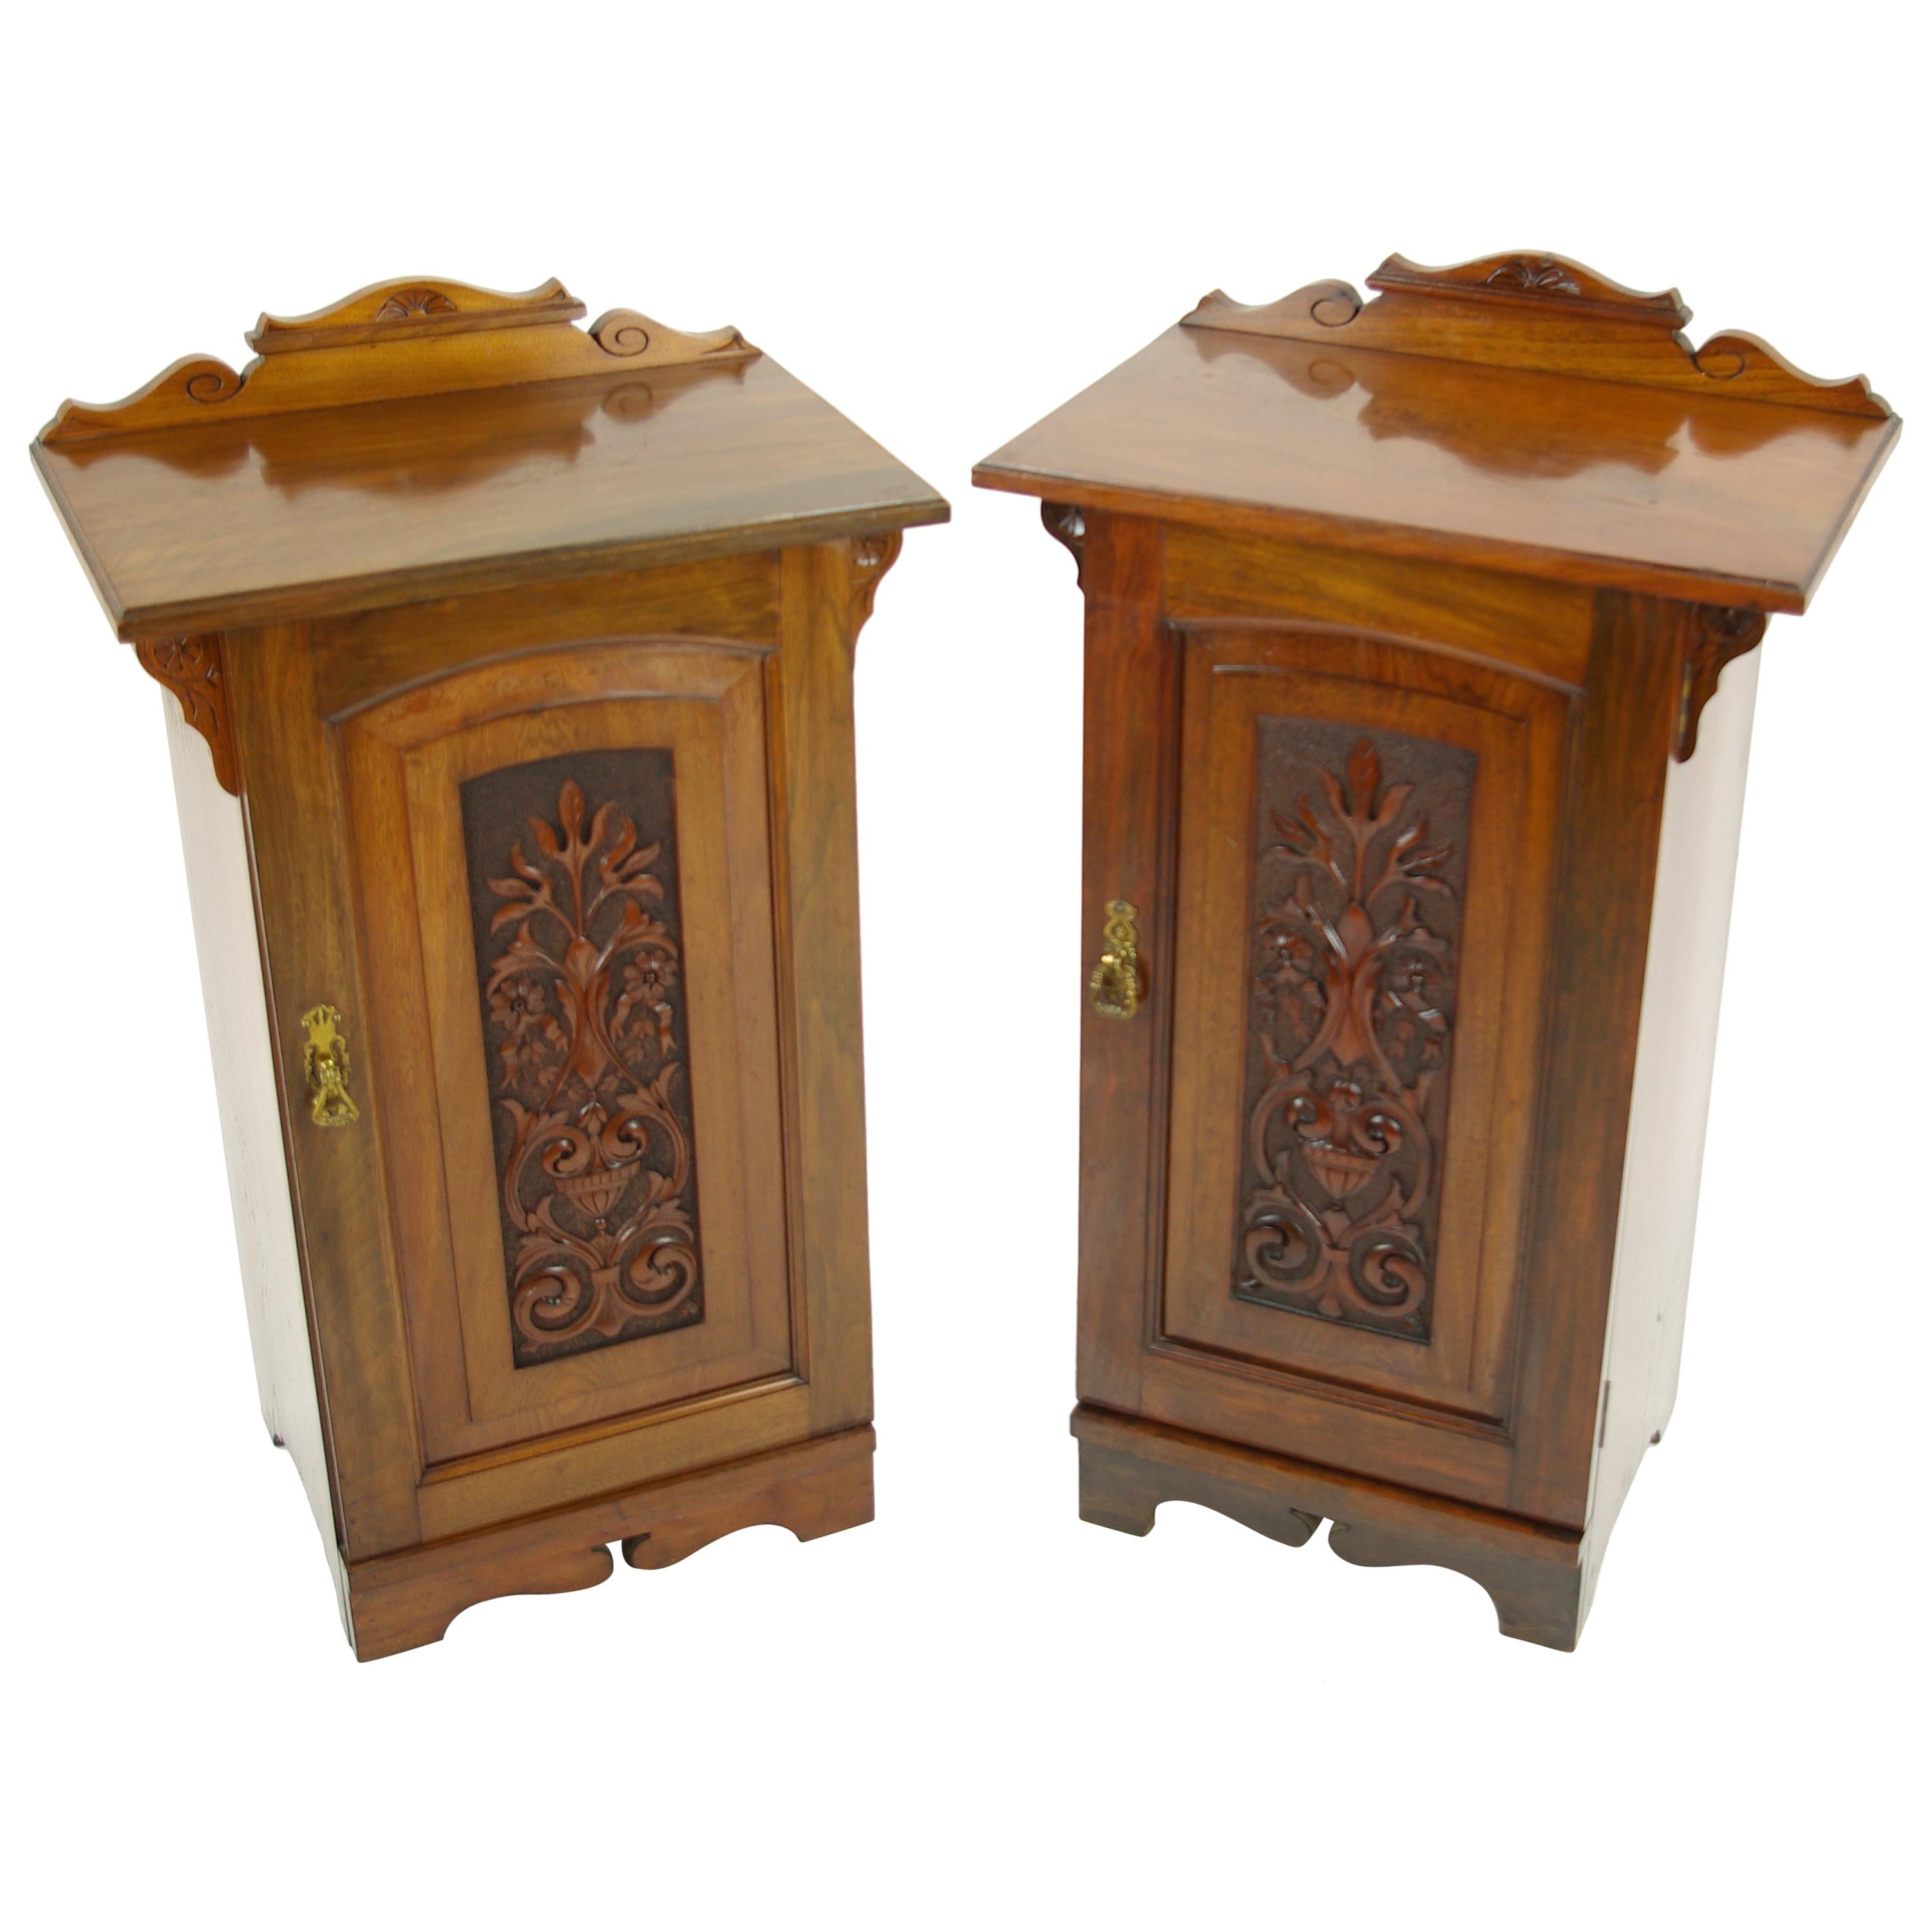 Antique Nightstands, Pair of Nightstands, Bedside Tables, Lamp Tables